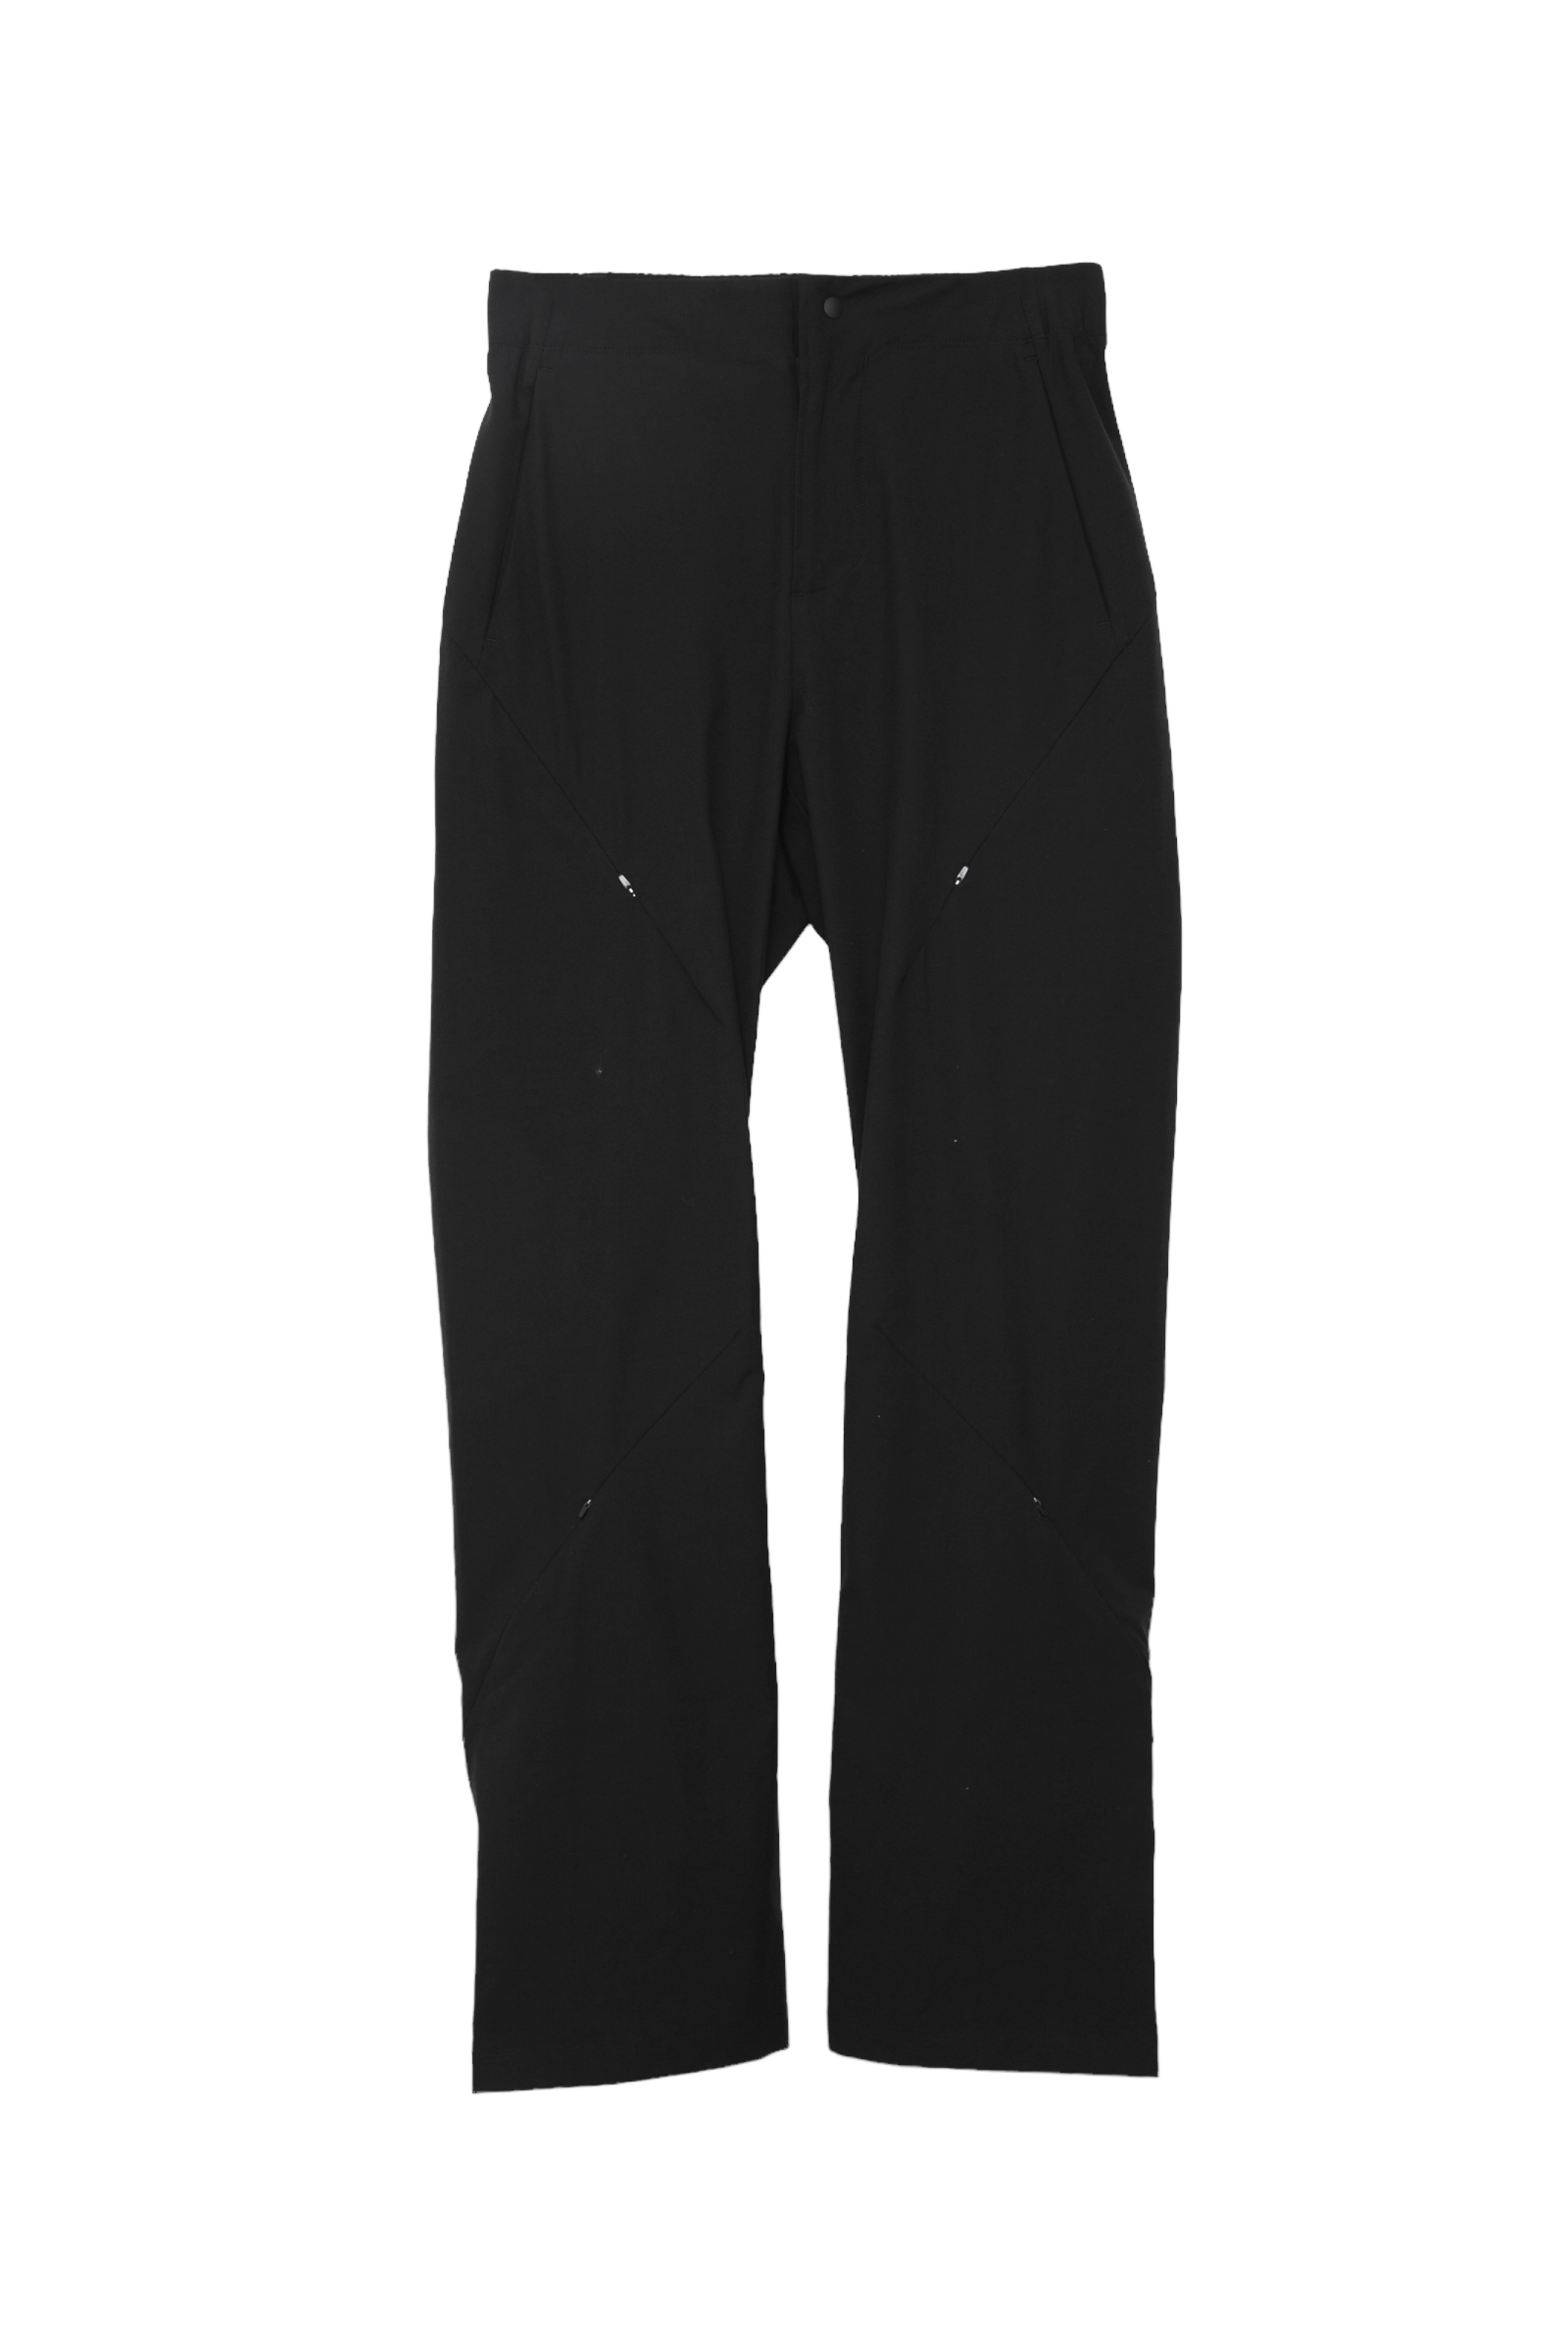 PAF 5.1 TECHNICAL PANTS RIGHT